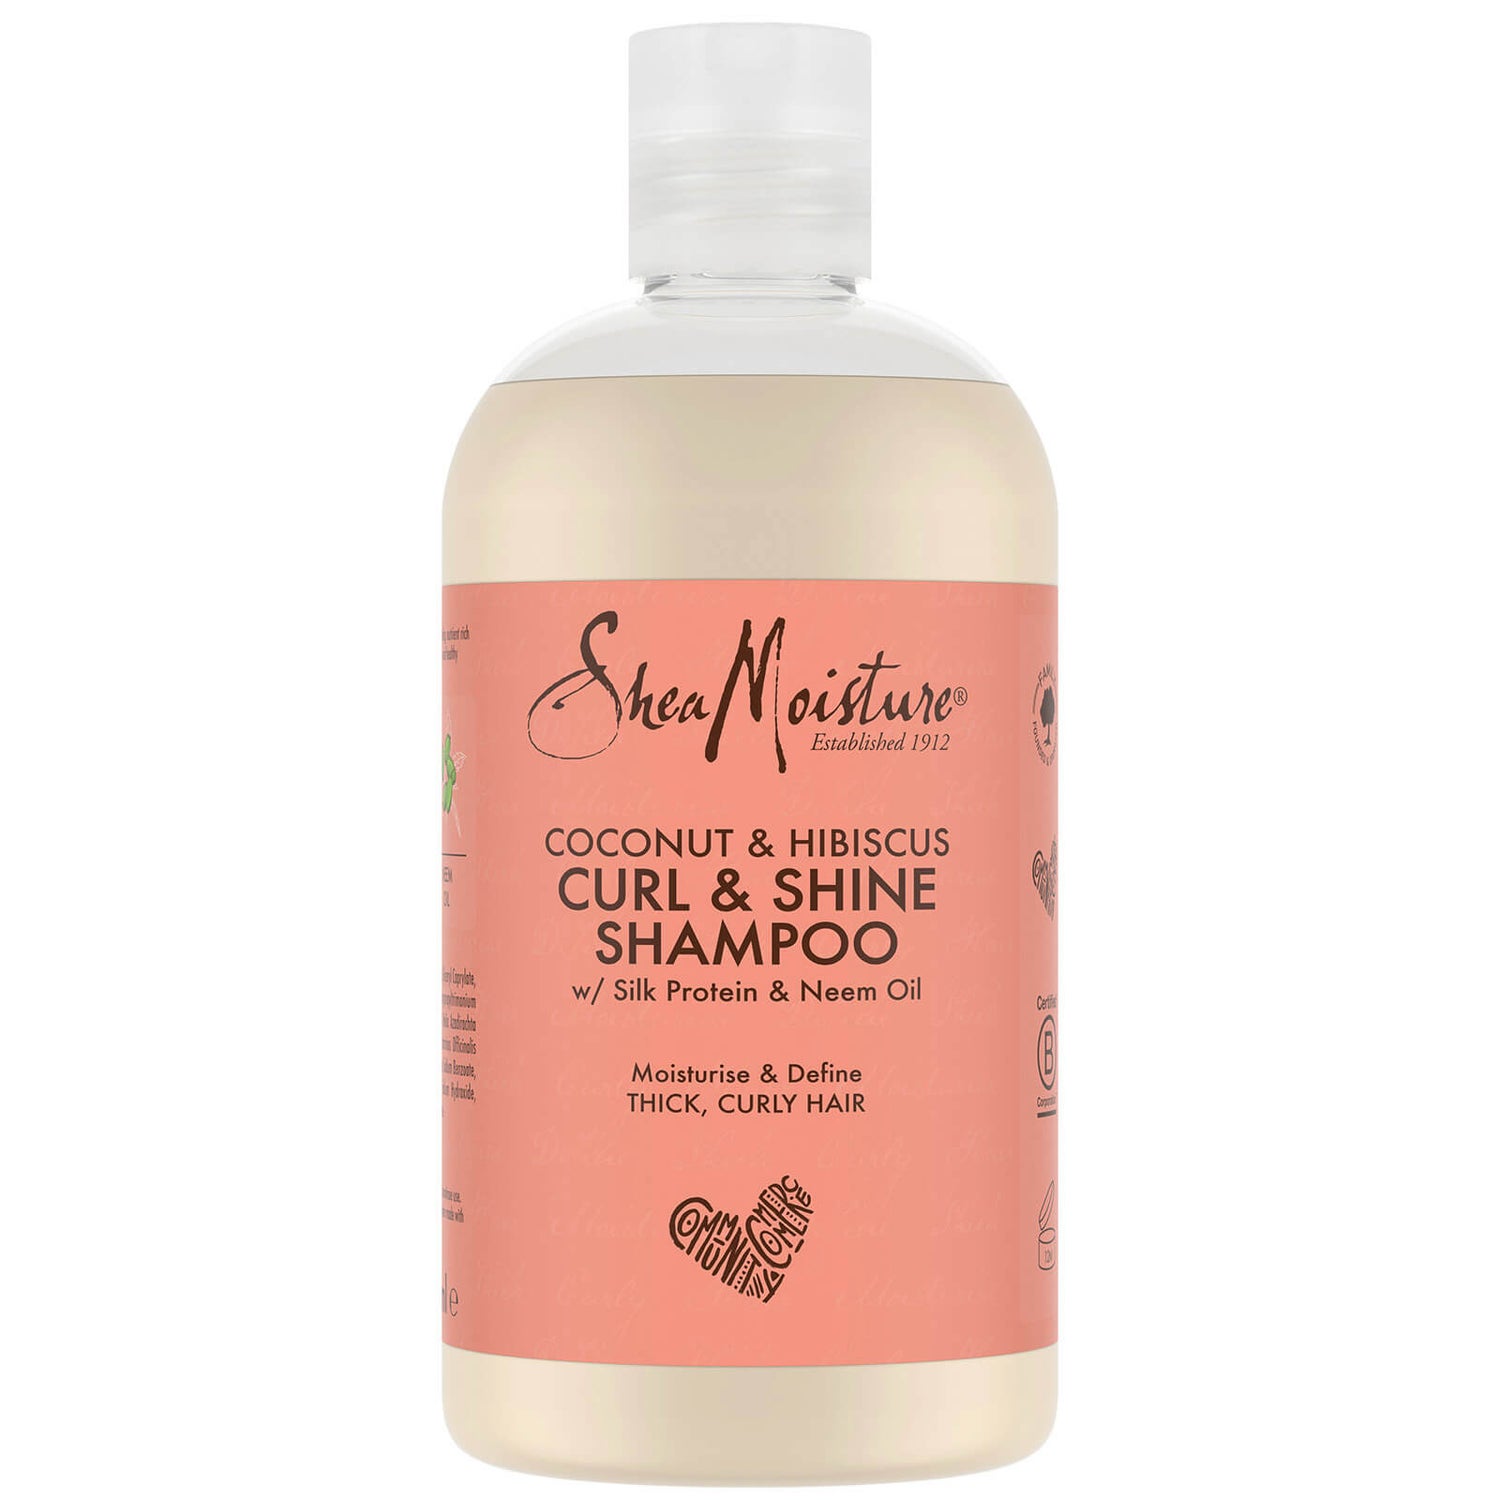 szampon shea moisture coconut and hibiscus opinie